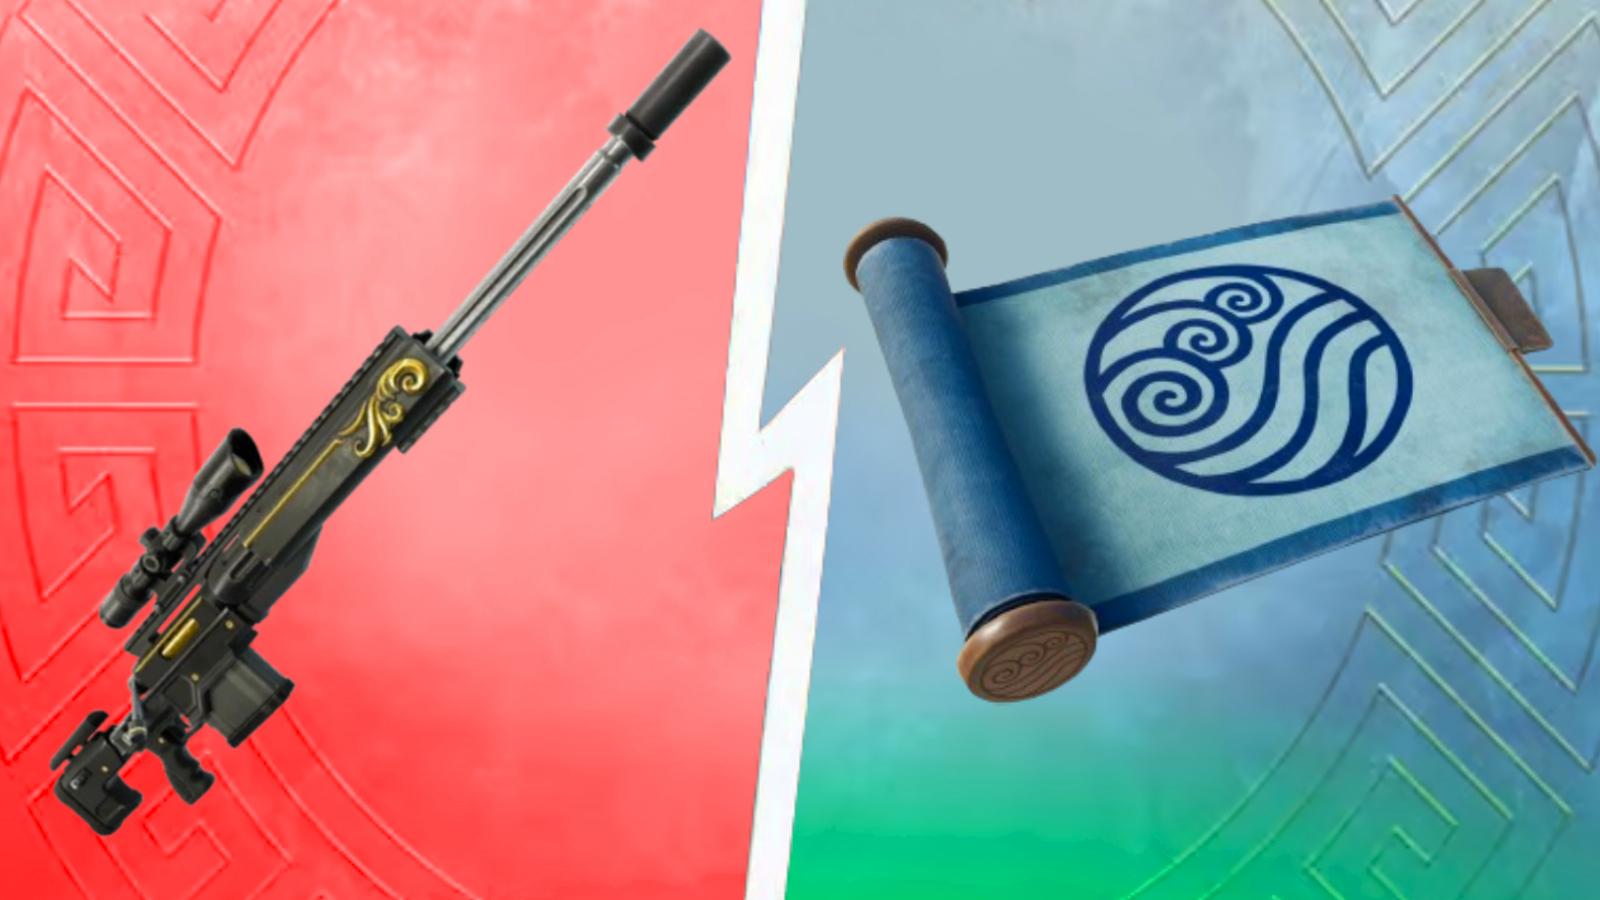 Fortnite Reaper Sniper and Avatar Waterbending mythic.